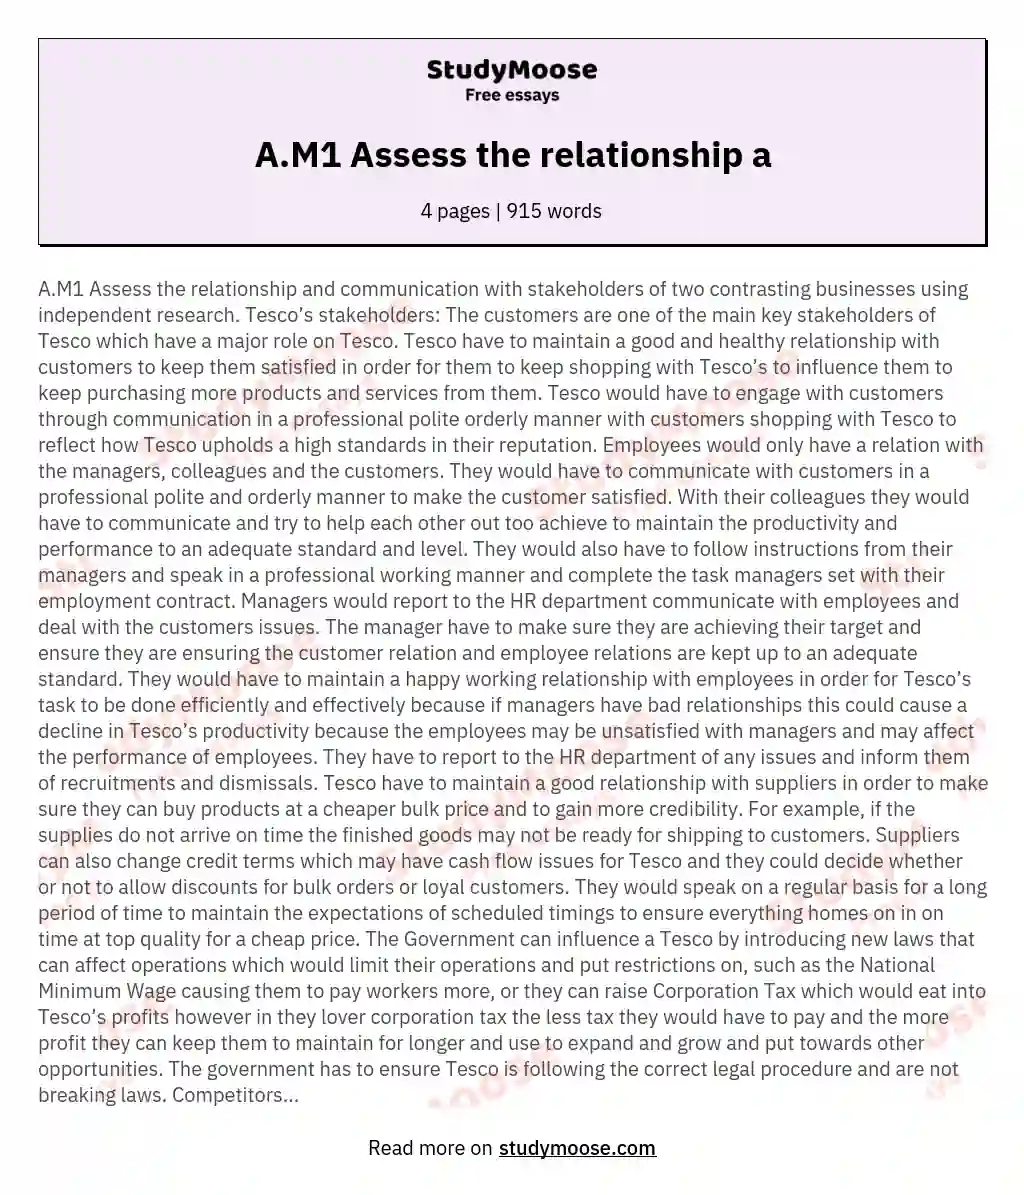 A.M1 Assess the relationship a essay